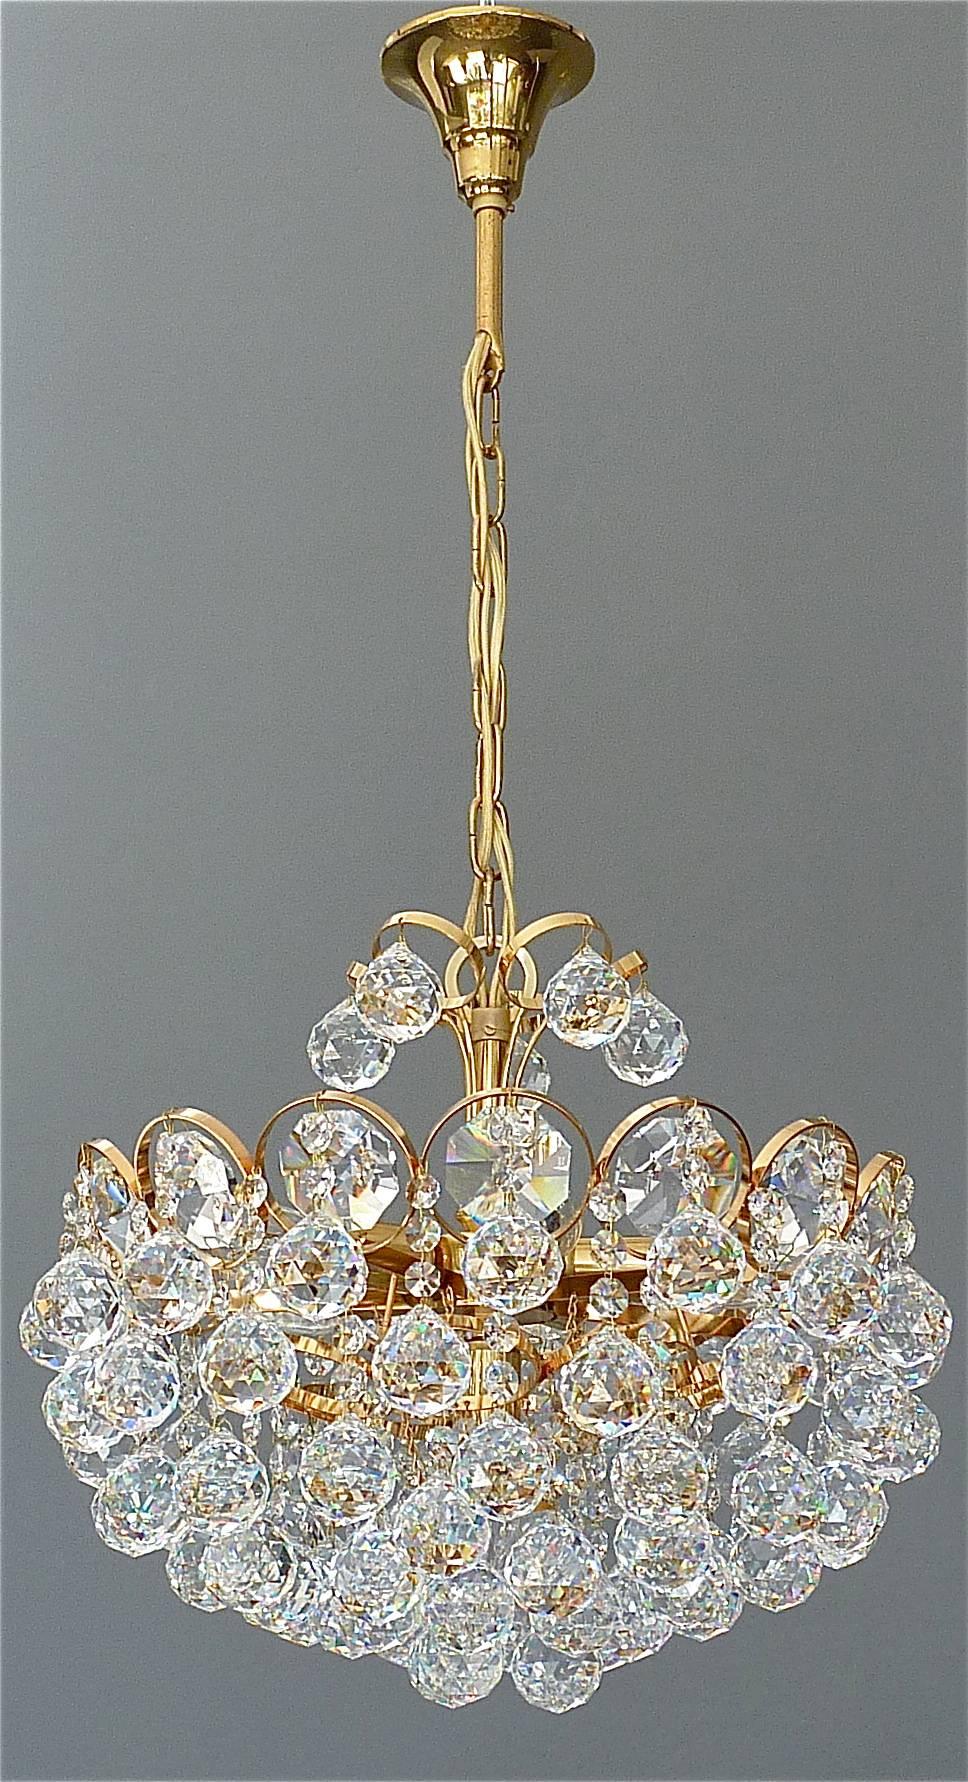 Precious gilt brass and crystal glass ball chandelier made by high class lighting company Palwa, Germany circa 1960-1970. The chain-hanging length-adjustable chandelier has a gilt brass metal construction with lots of high lead hand-cut faceted